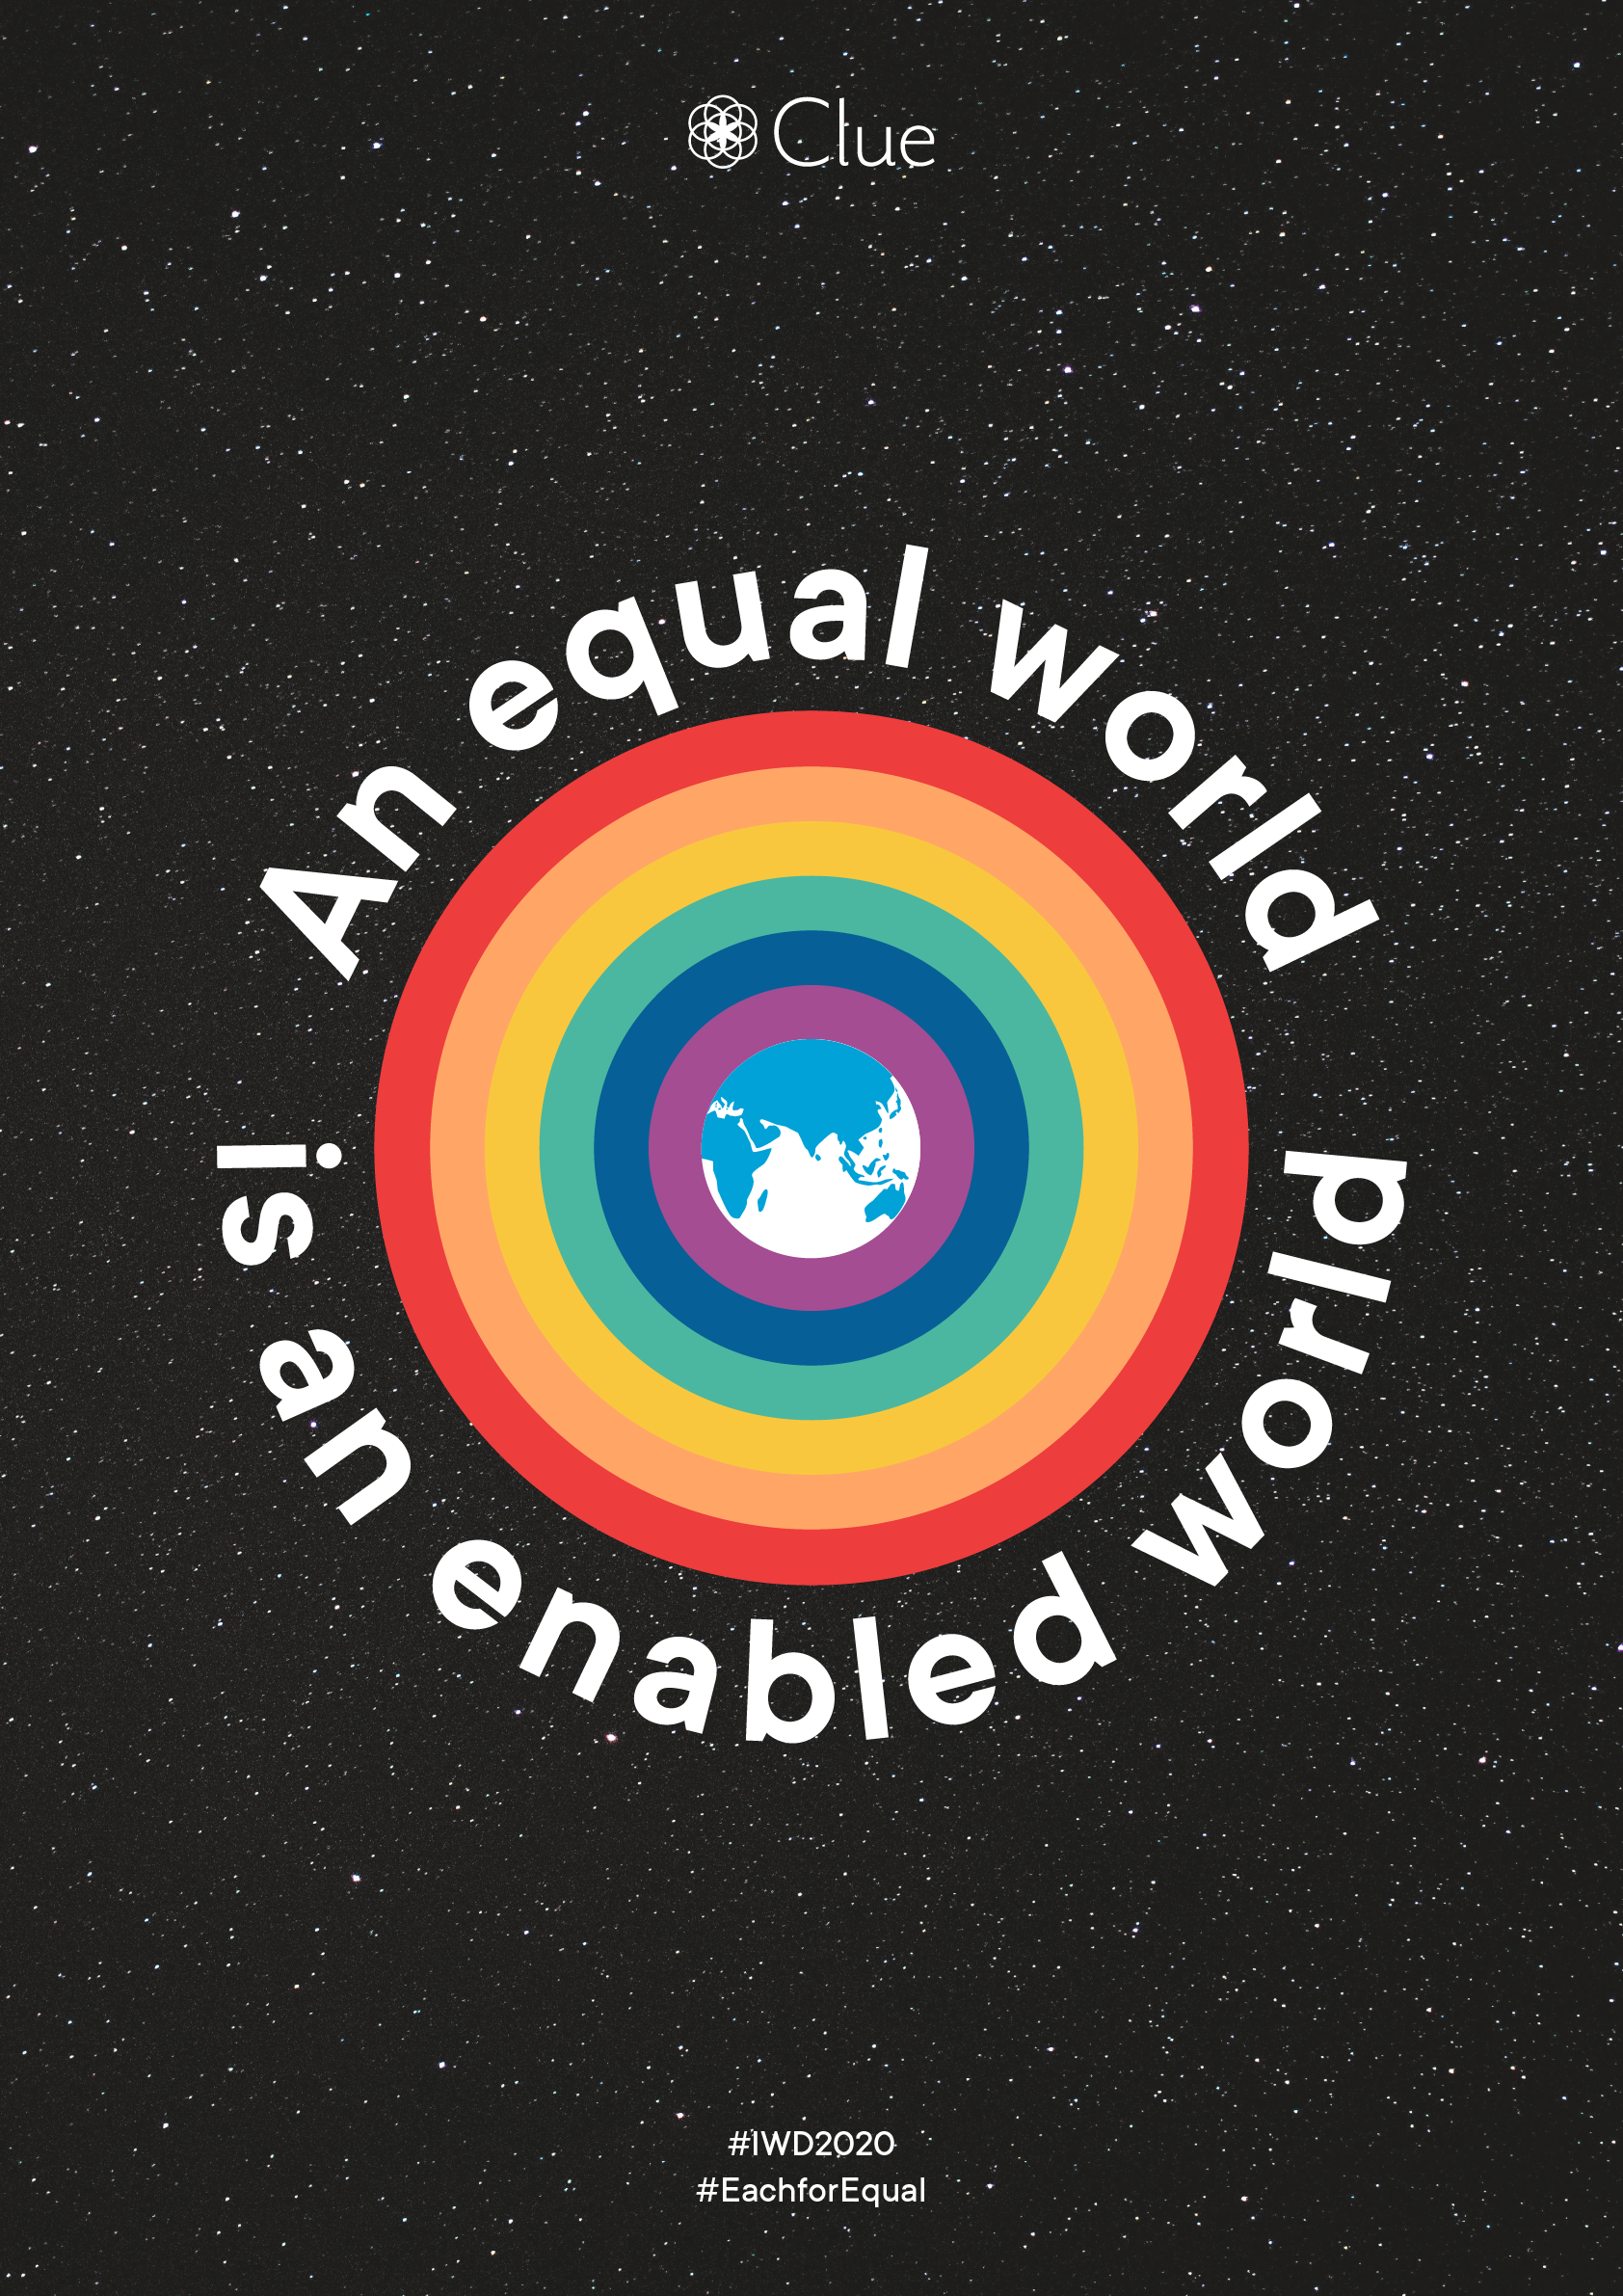 "An Equal World is an Enabled World" - International Women's Day poster